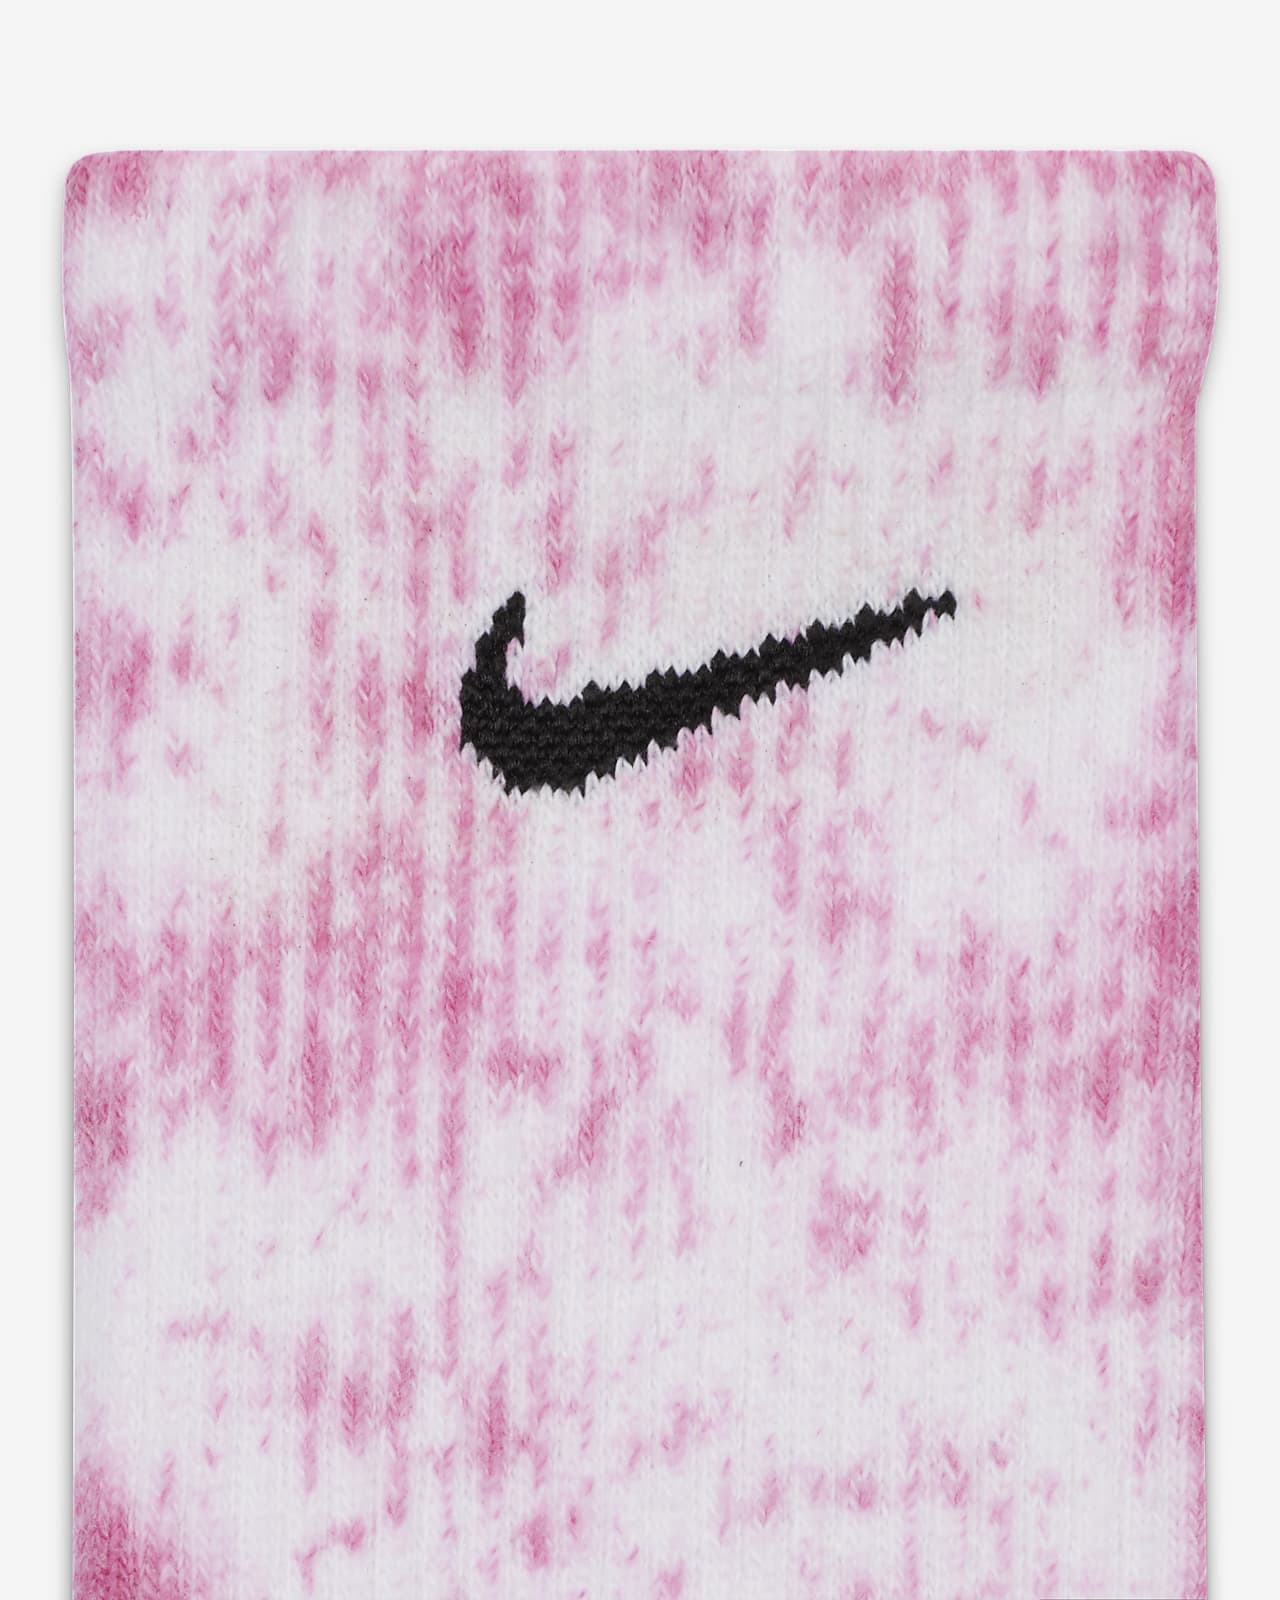 NIKE CHAUSSETTES X3 CREW EVERYDAY PLUS TIE DY ROSE - CHAUSSETTE